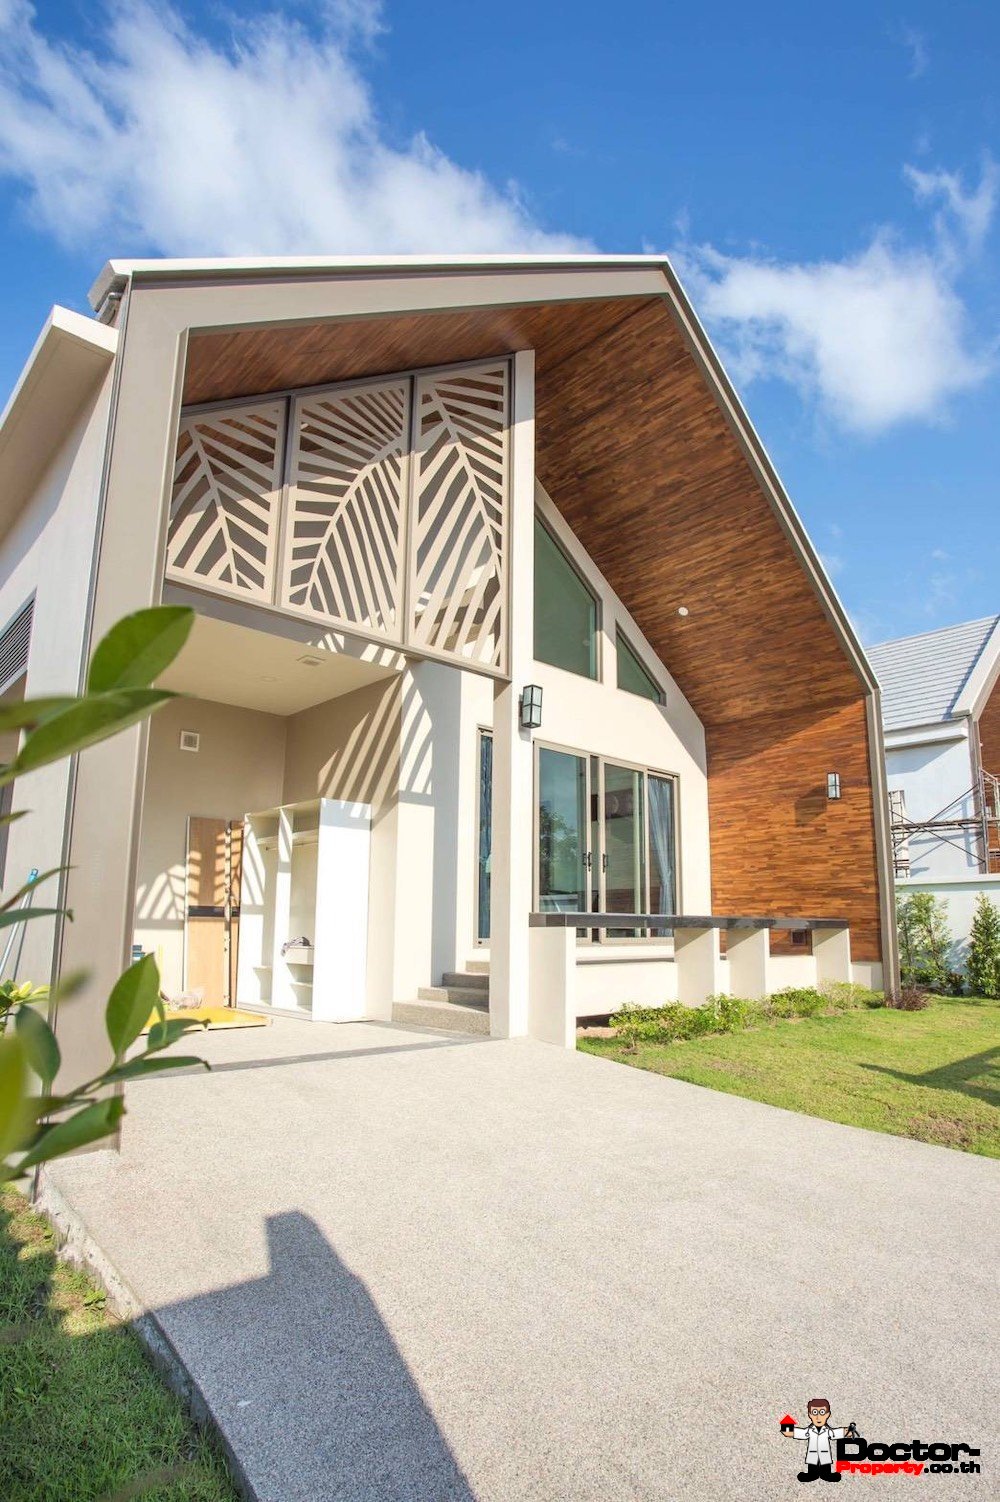 New 2 Bedroom Modern House in The Heart of Chaweng - Koh Samui